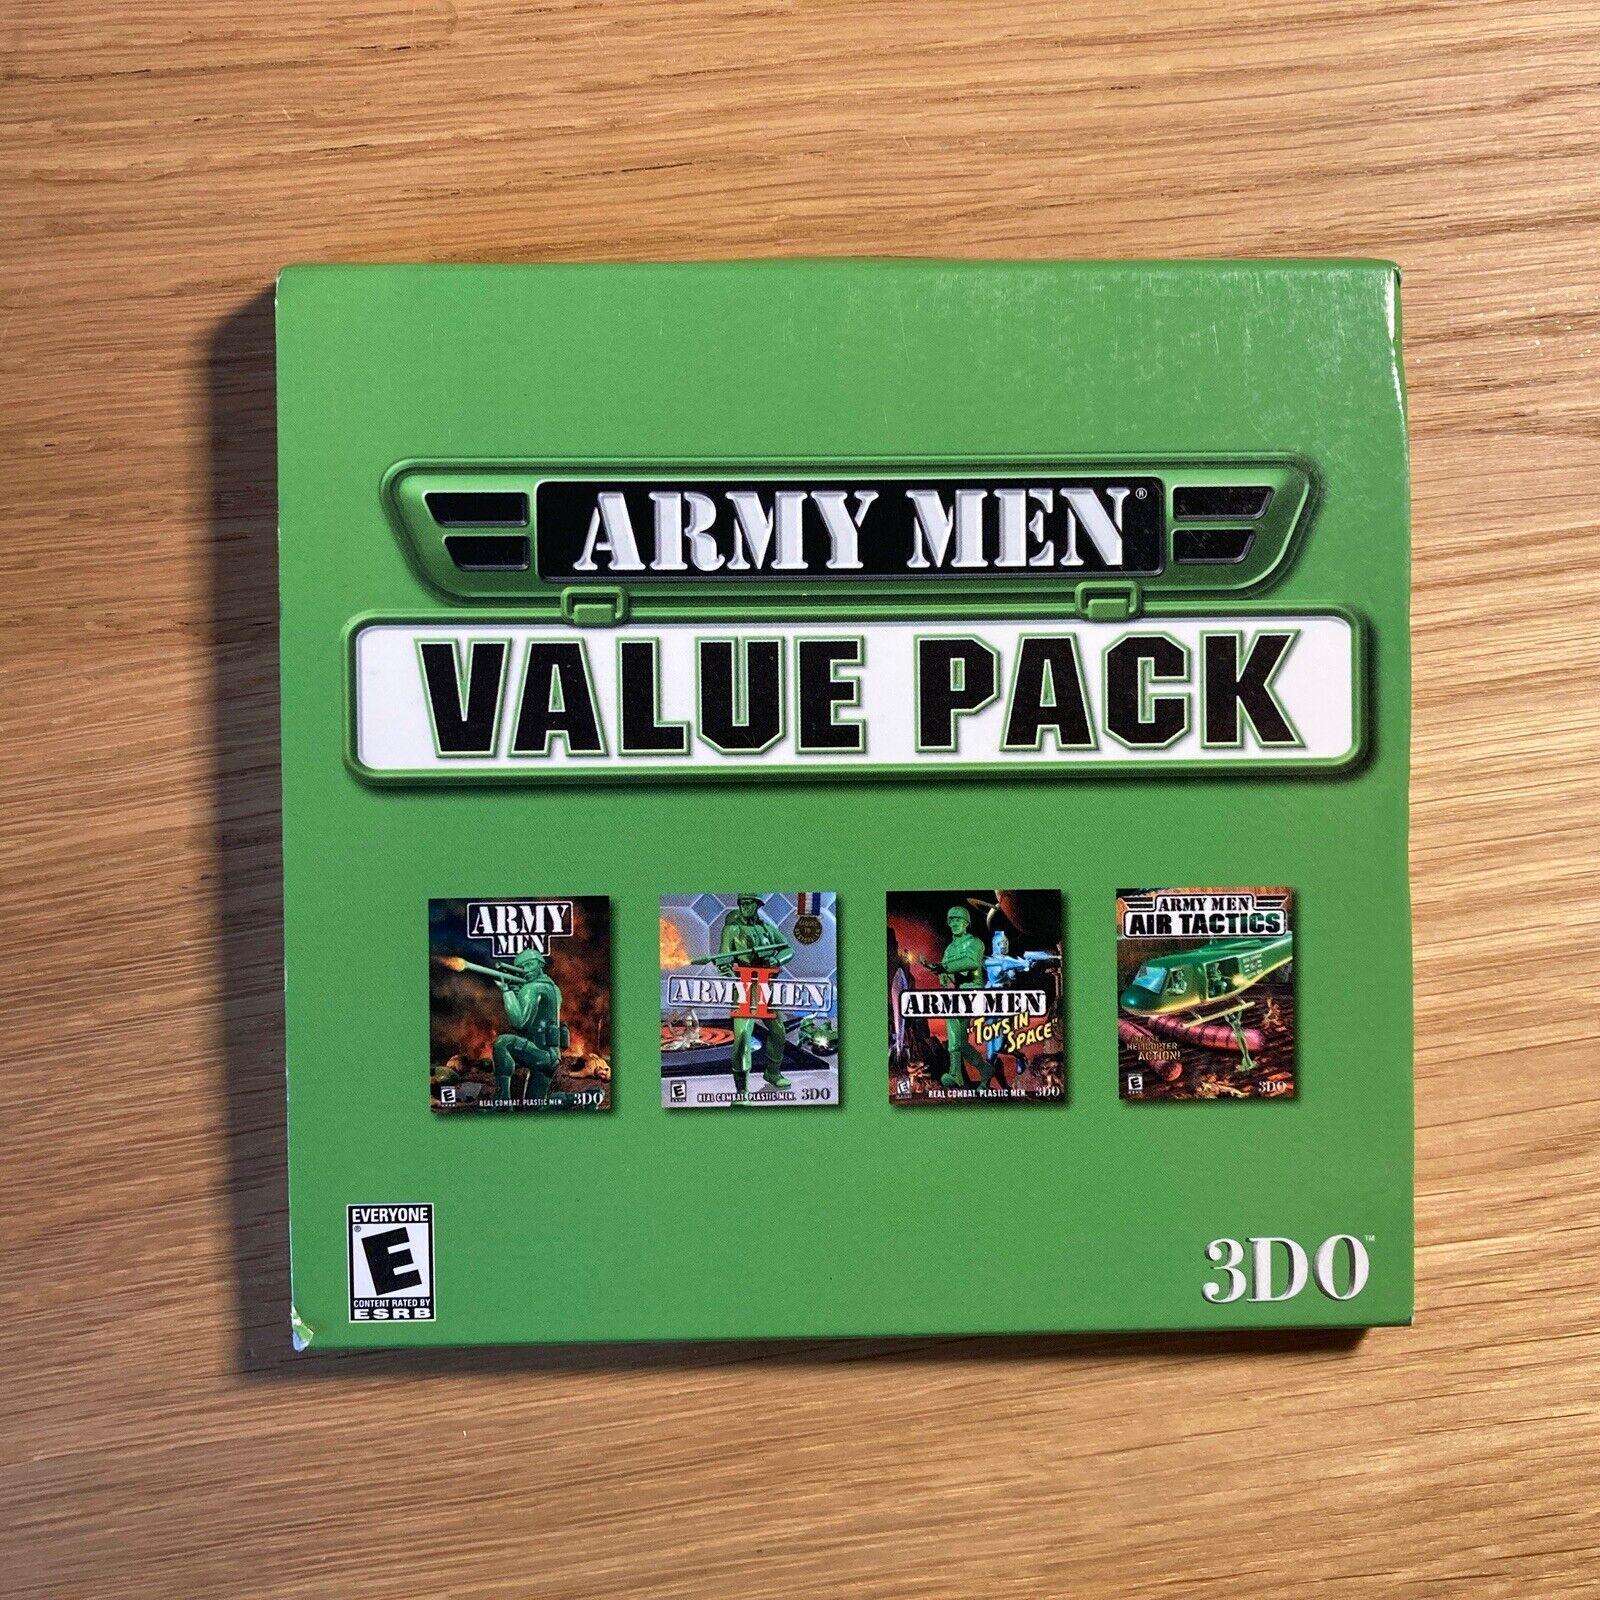 Army Men Value Pack PC CD-ROM Army Men 1 and 2 Toys in Space and Air Tactics 